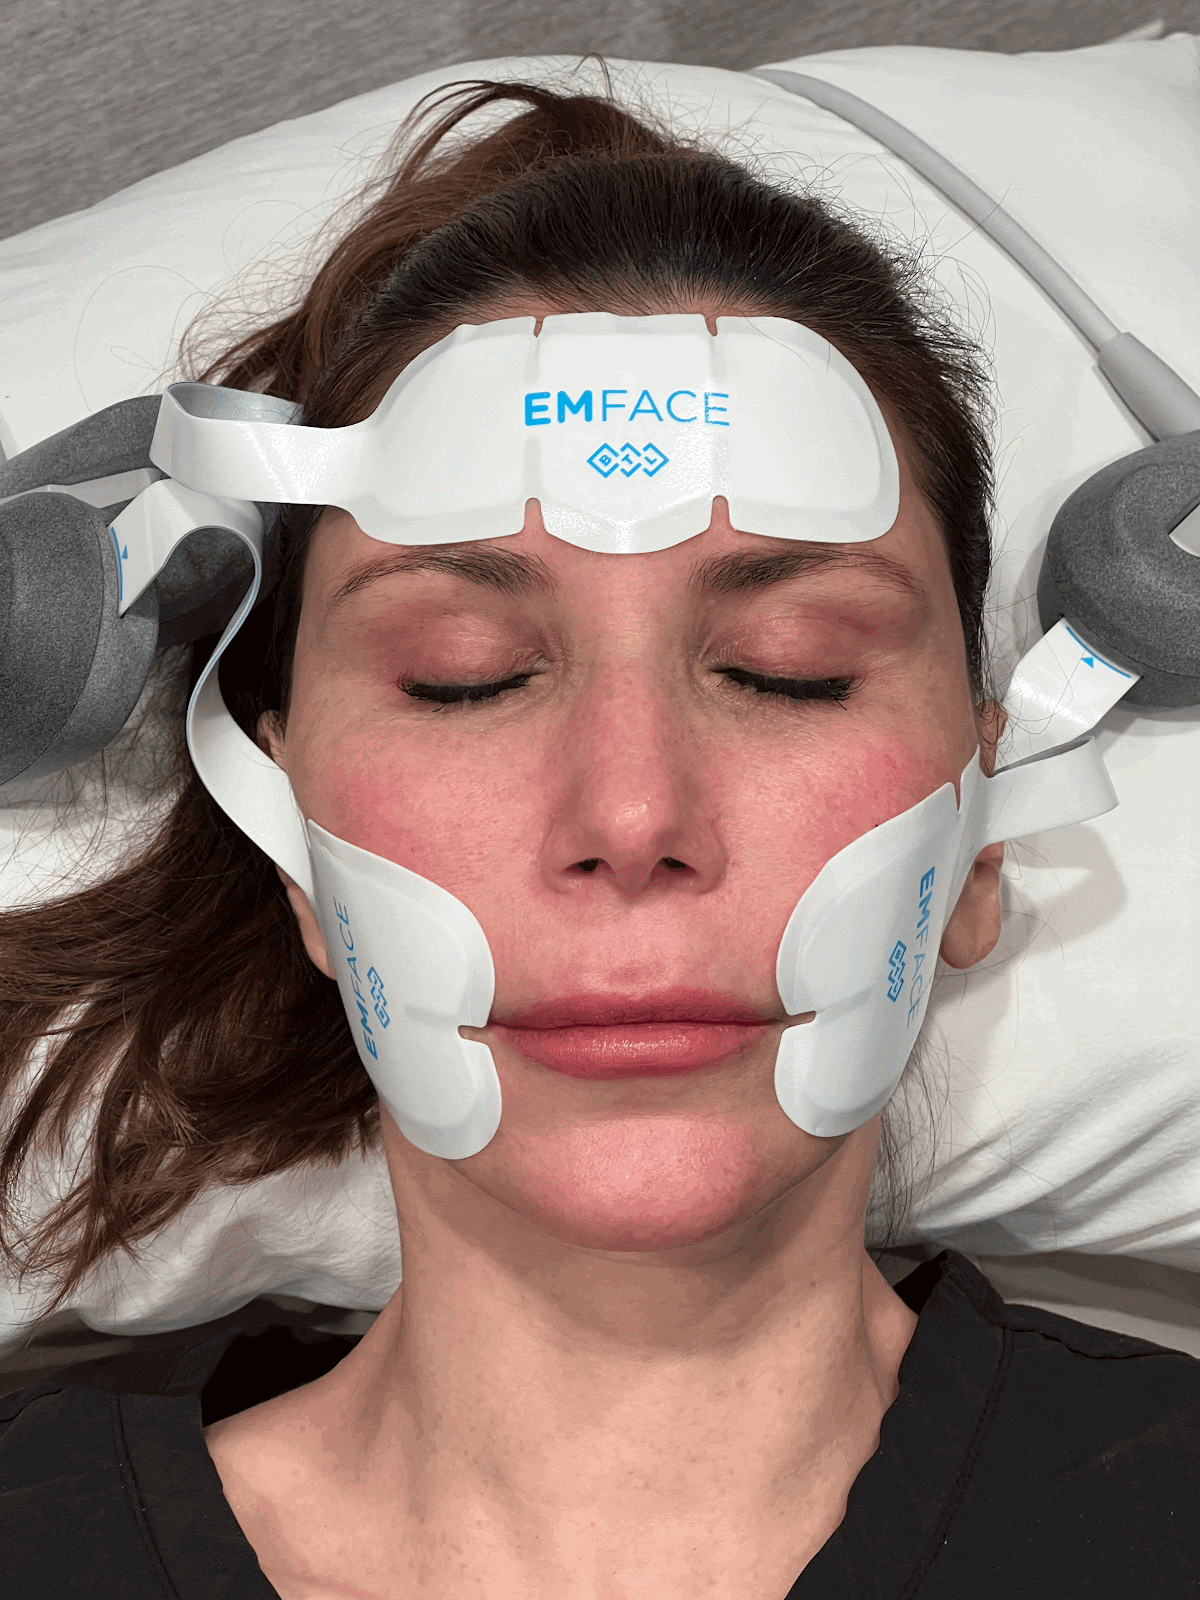 A female patient receiving Emface treatment, with facial electrodes in place, demonstrating the non-invasive procedure for facial toning and lifting.